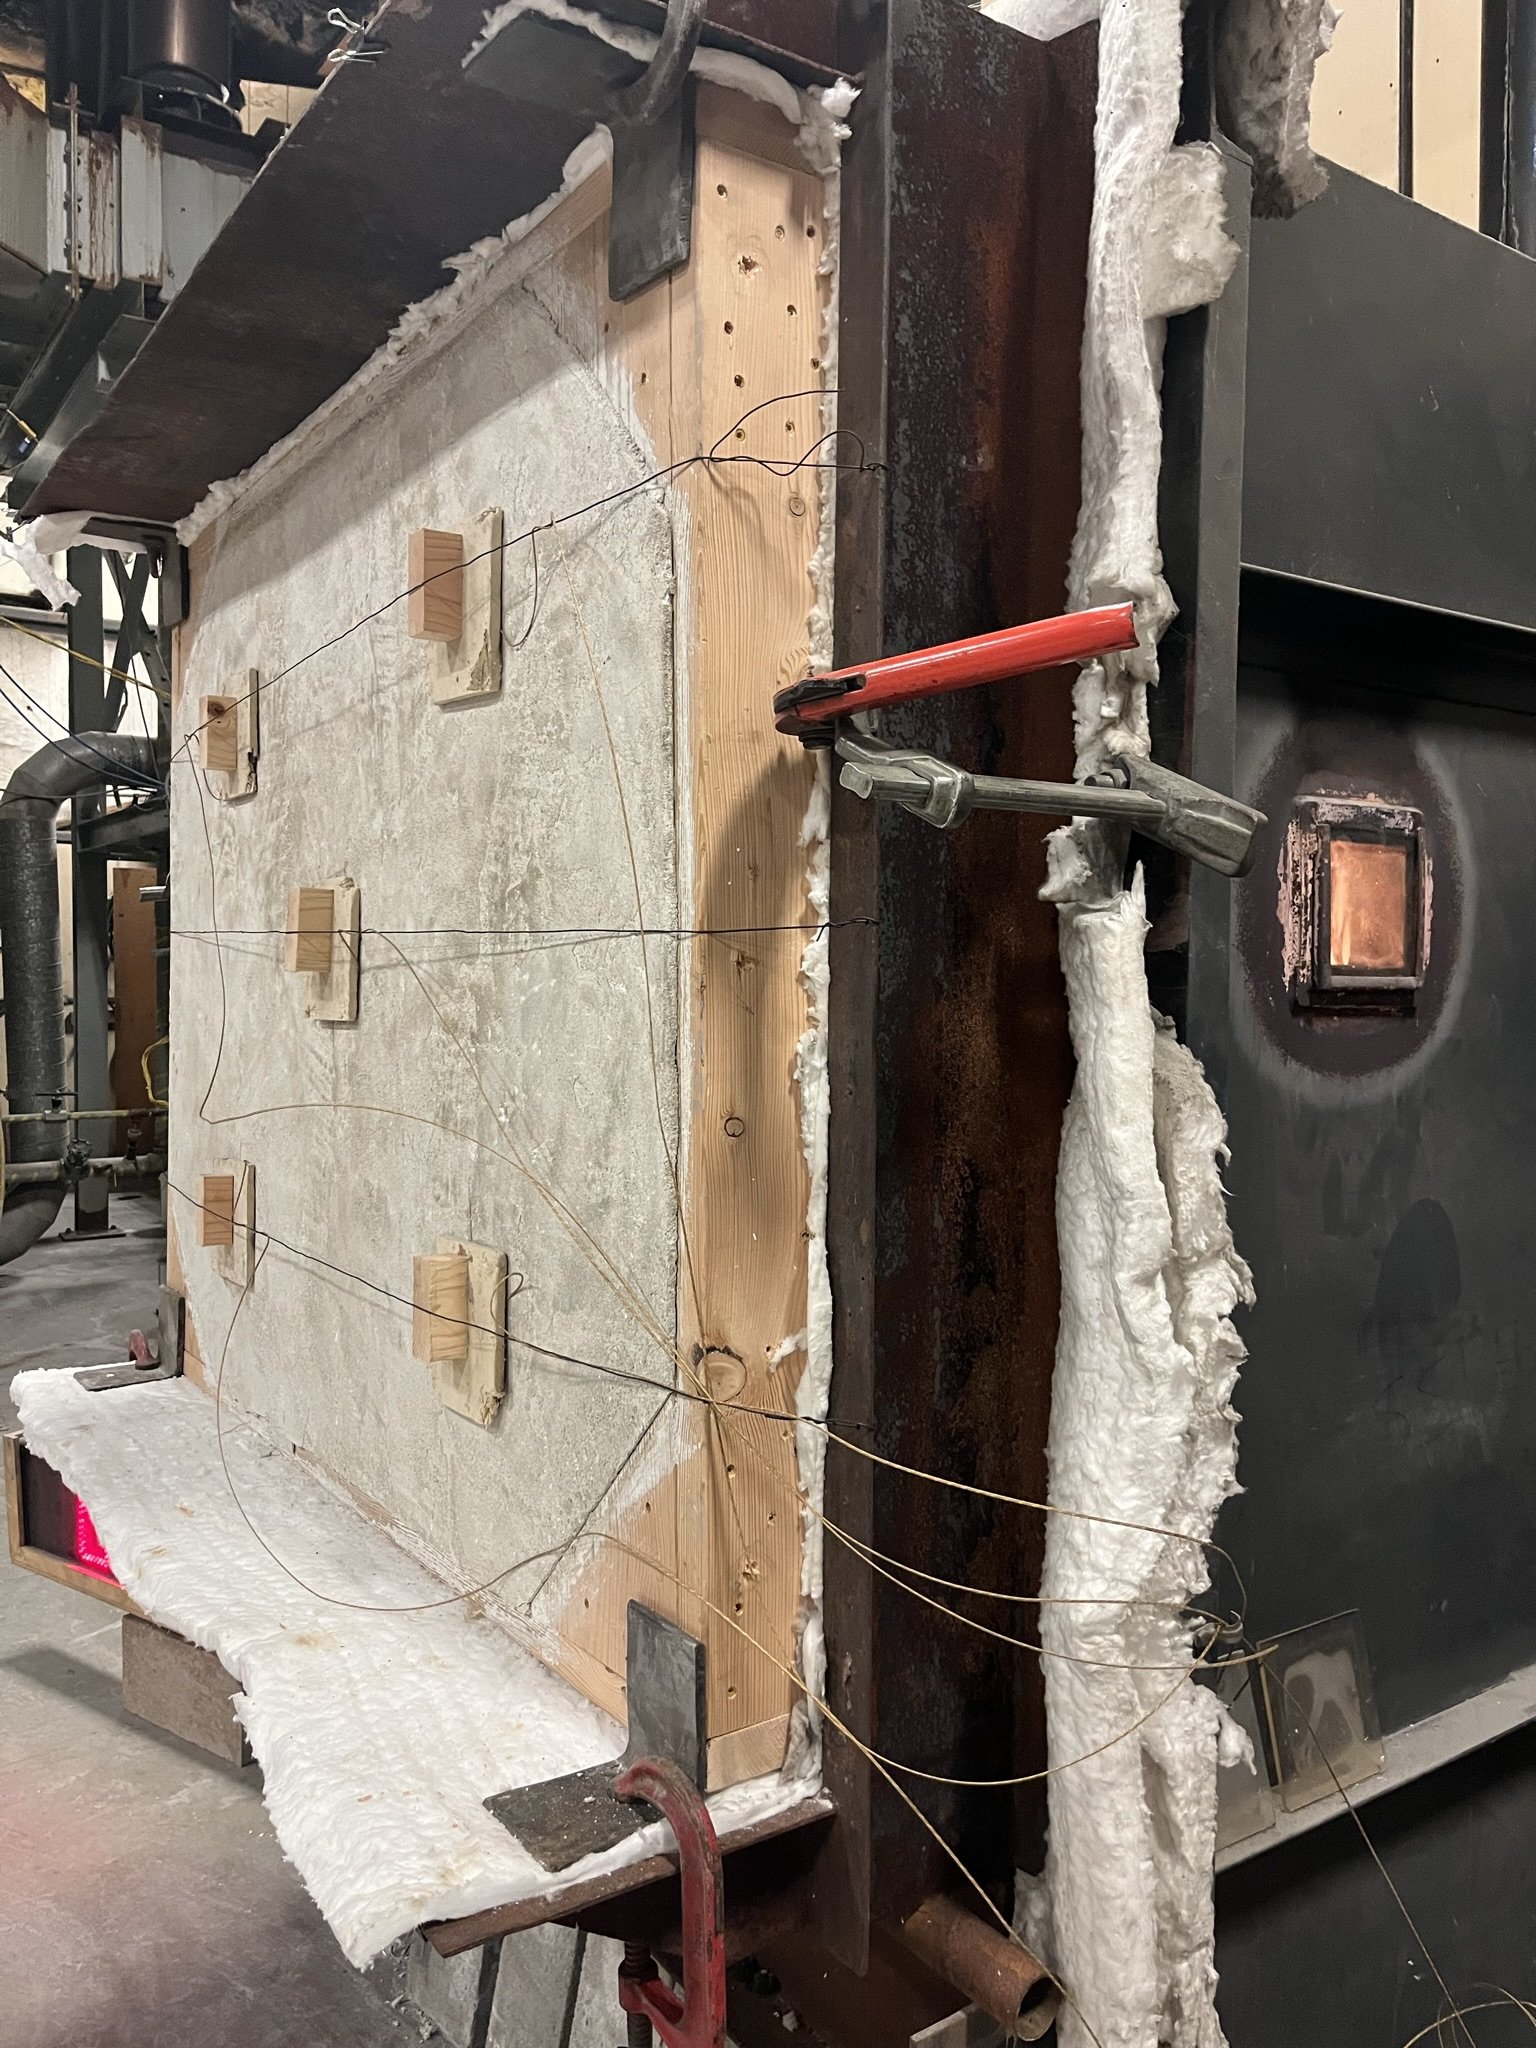 Wall secured to chamber with furnace on